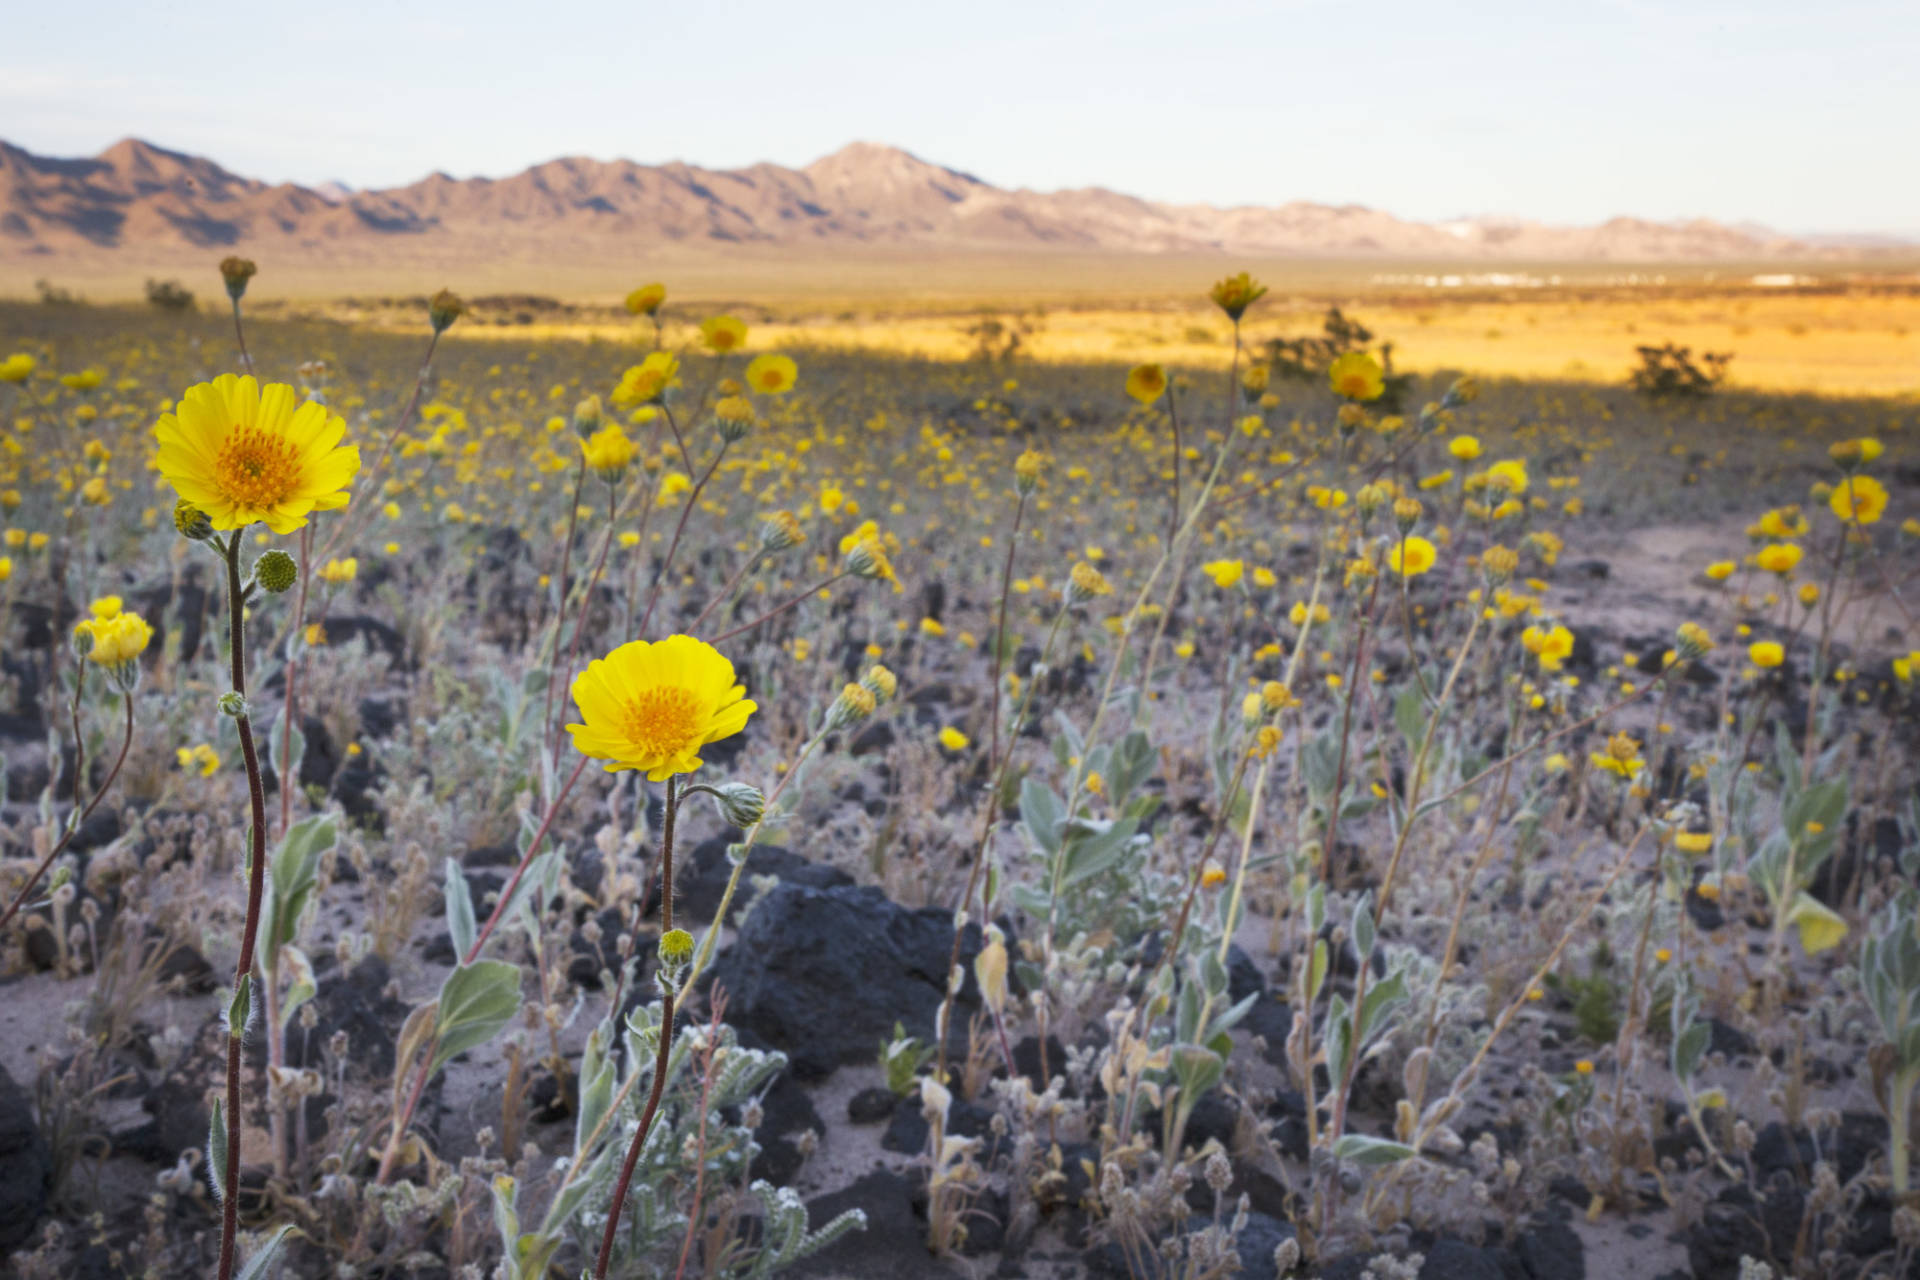 The usually barren desert is covered in acres of desert gold and desert dandelion because of this year's superbloom happening at the Amboy Crater National Natural Landmark in the Mojave Desert. Sarah Craig/KQED